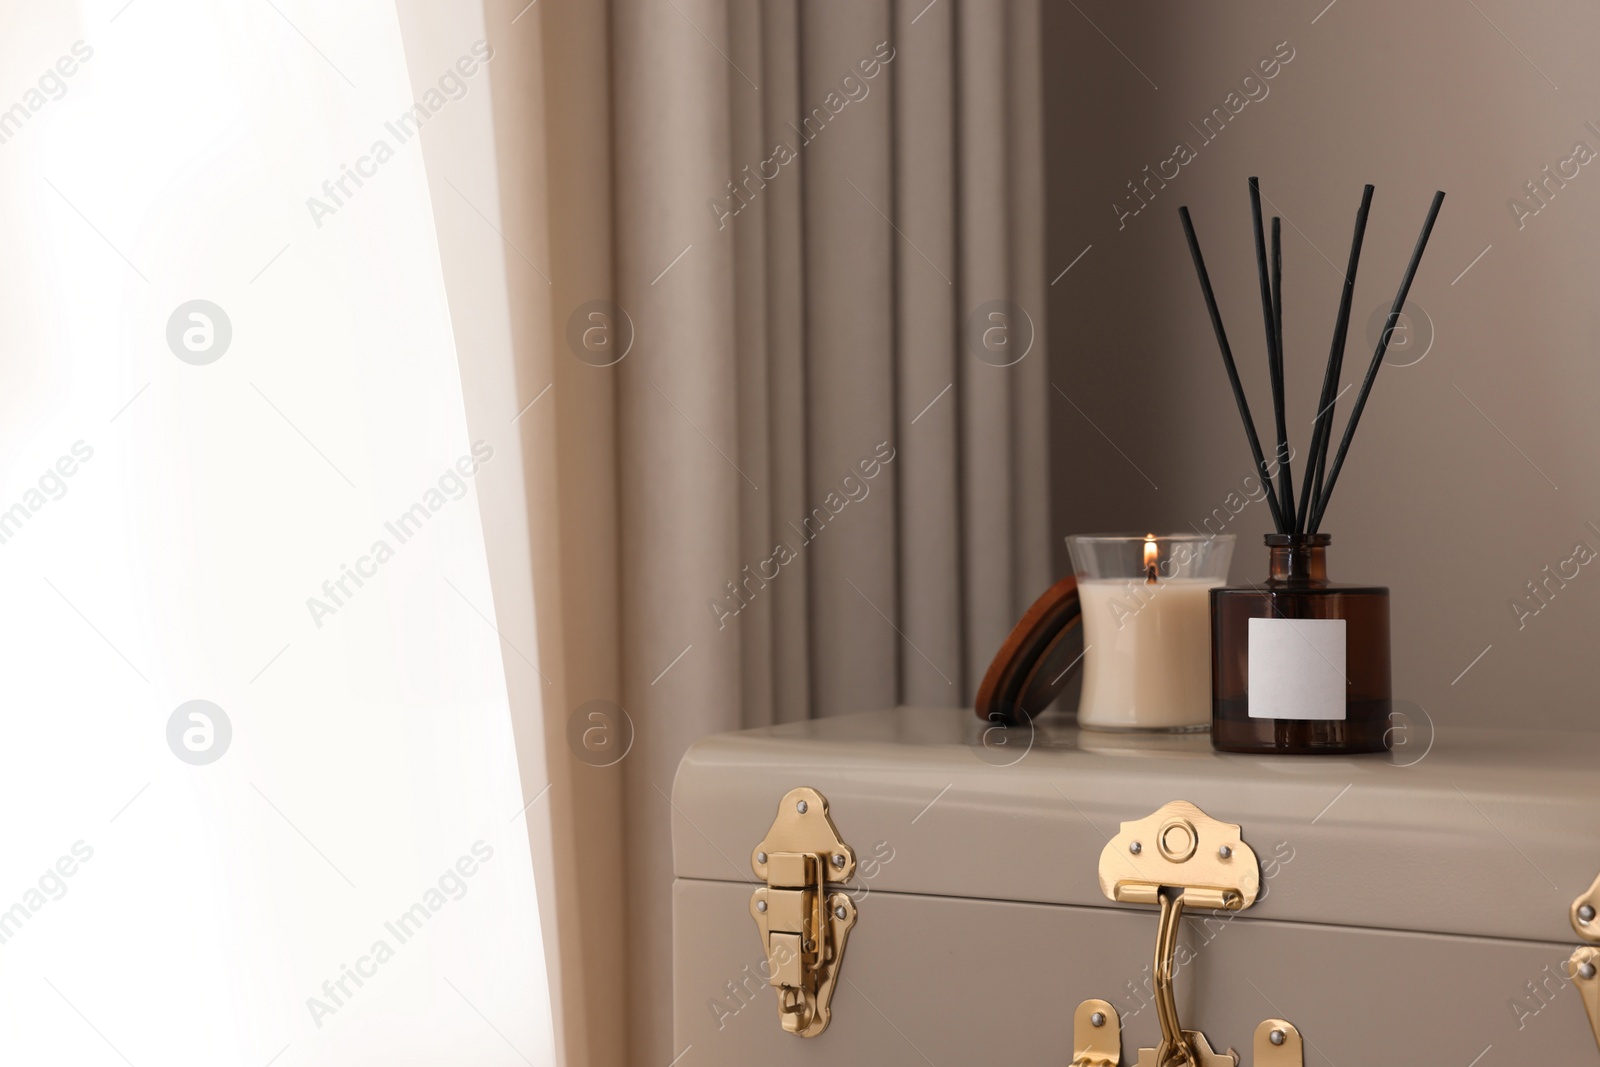 Photo of Aromatic reed air freshener and candle on suitcase indoors, space for text